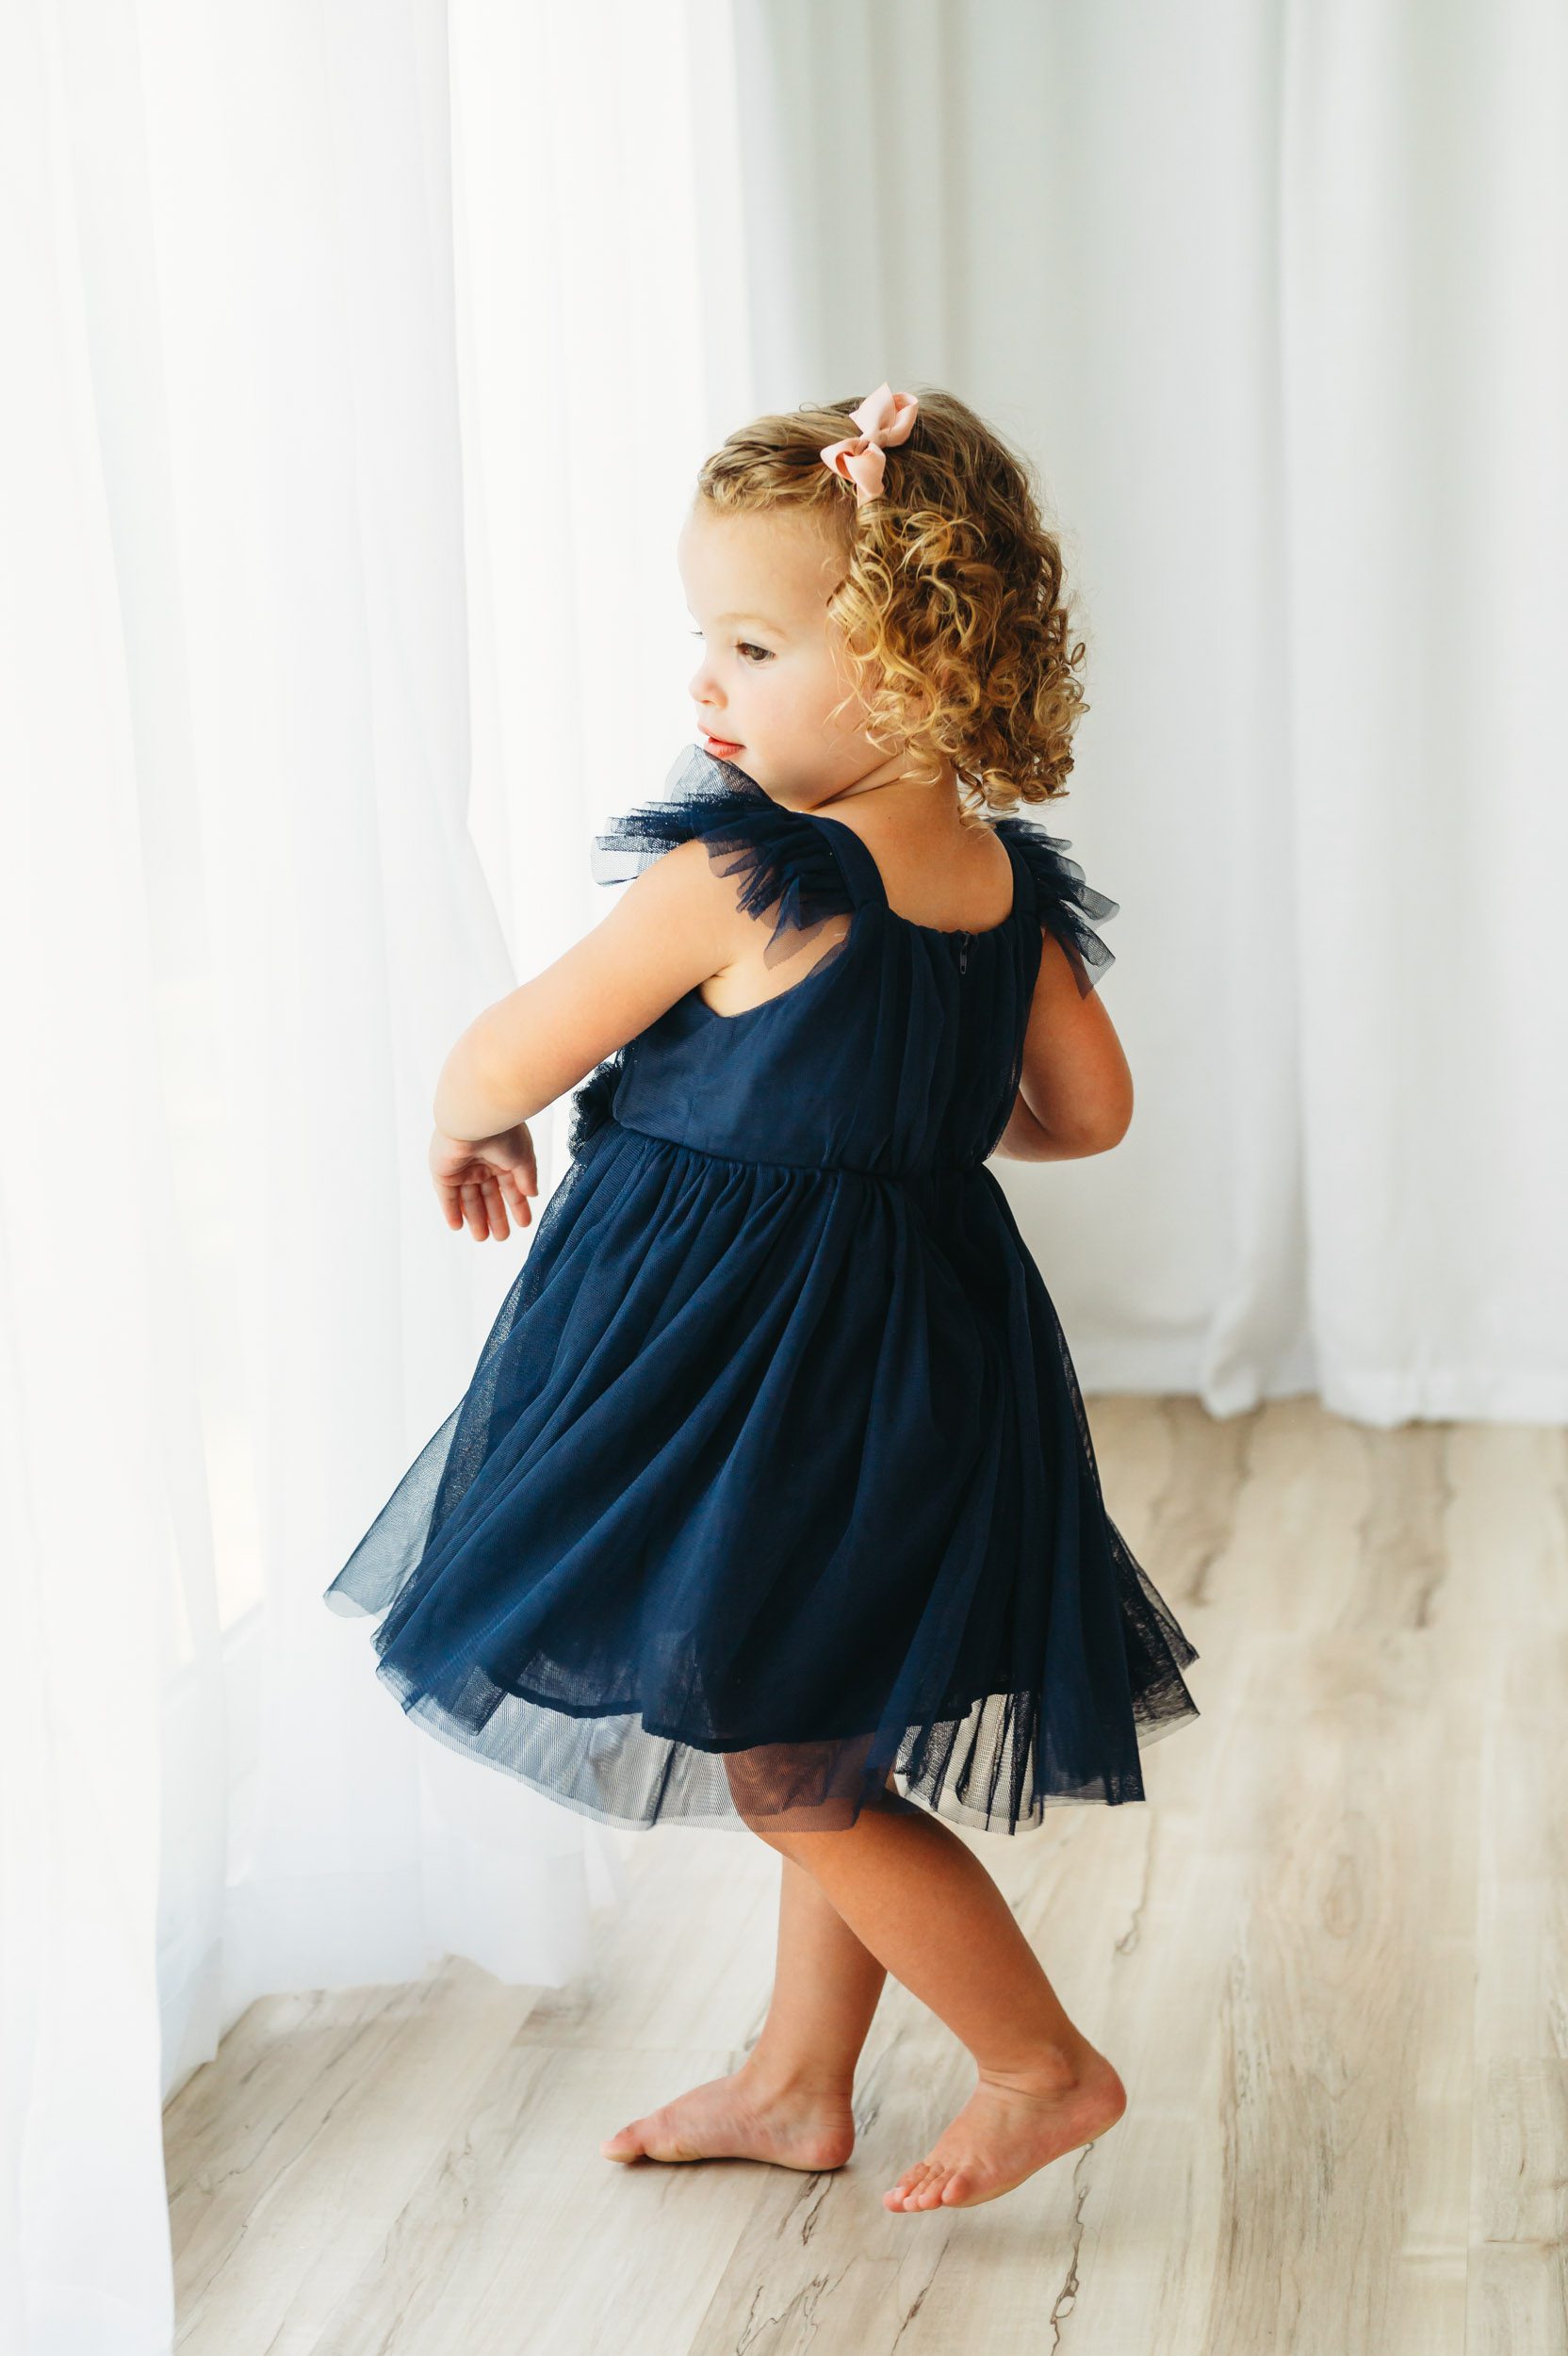 a toddler wearing a blue dress standing in front of a wall of windows and playing with the sheer curtains during a 2nd birthday photoshoot